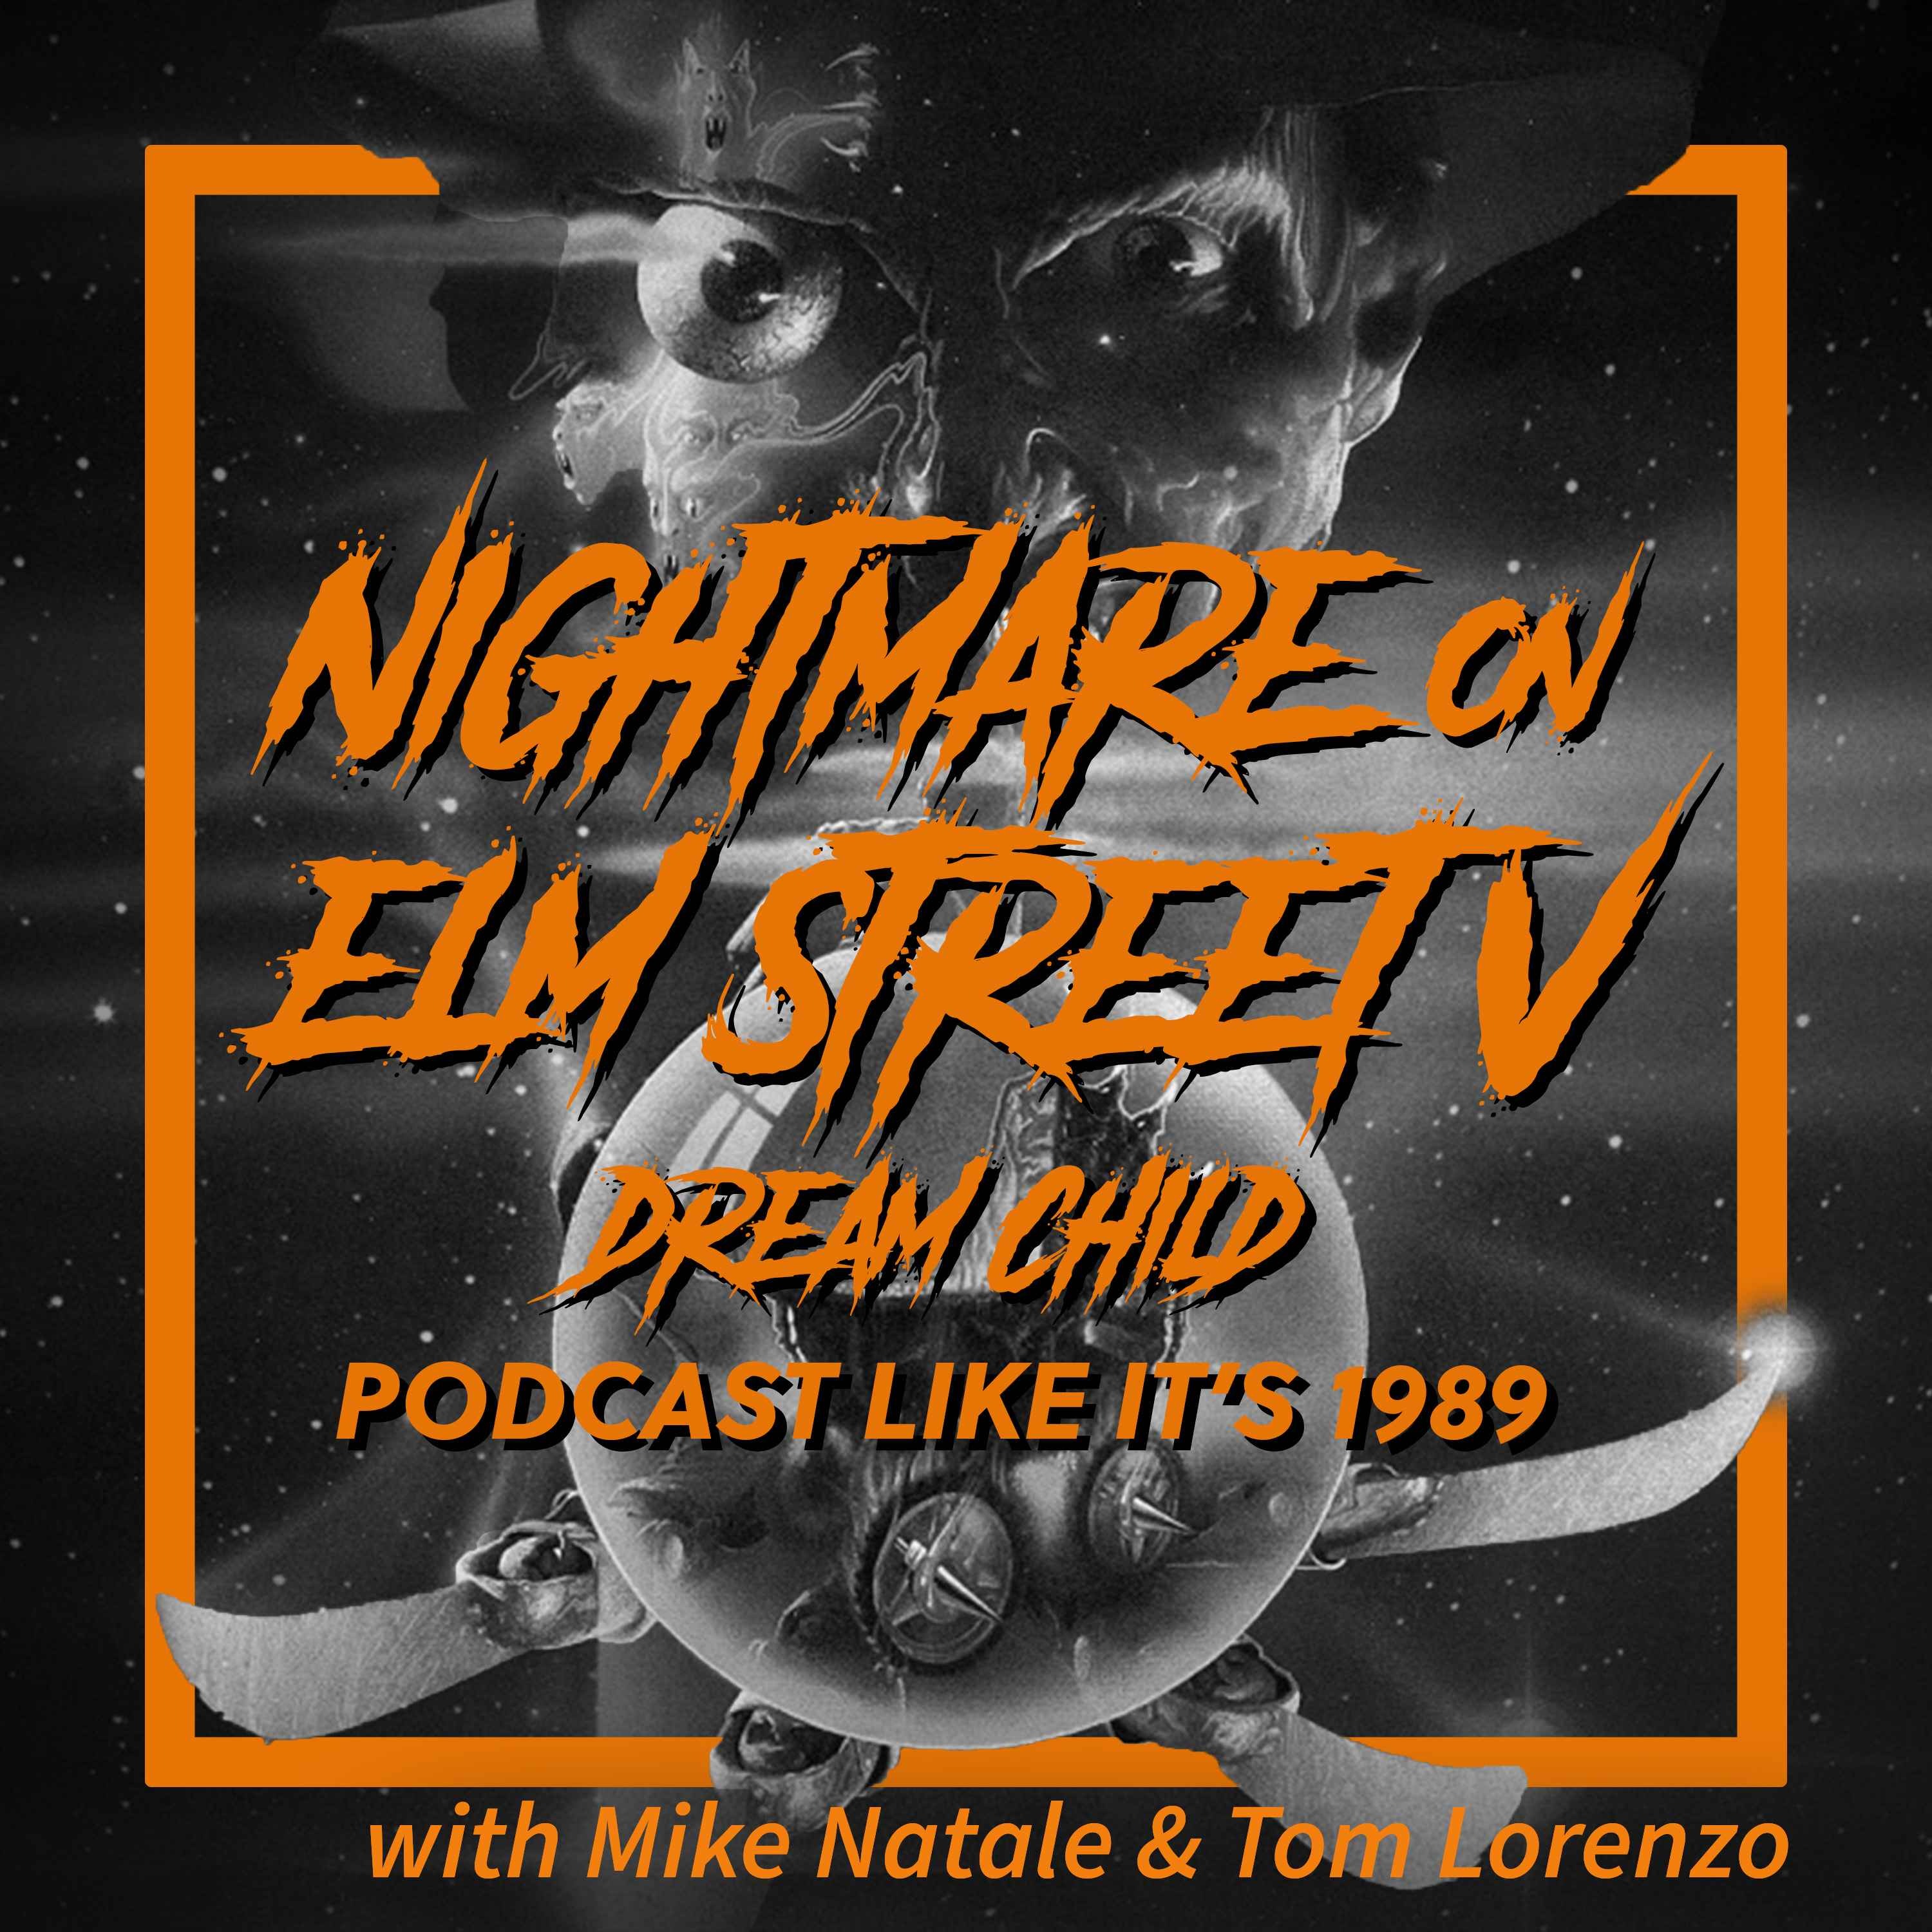 1989: Nightmare on Elm Street: The Dream Child with Mike Natale & Tom Lorenzo